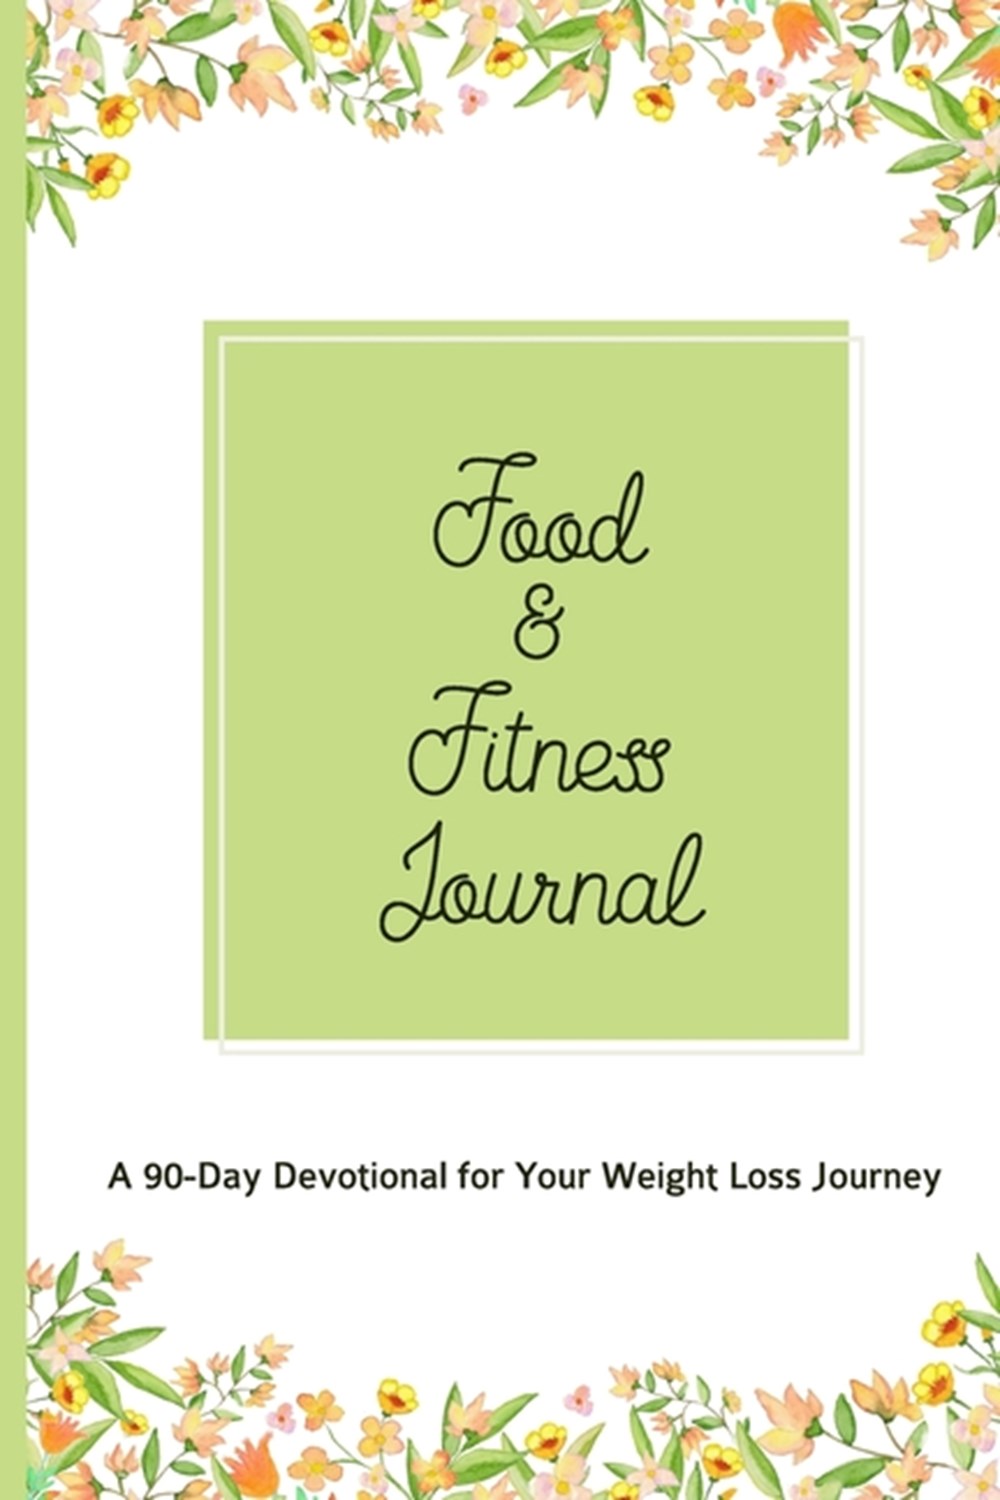 biblical weight loss quotes